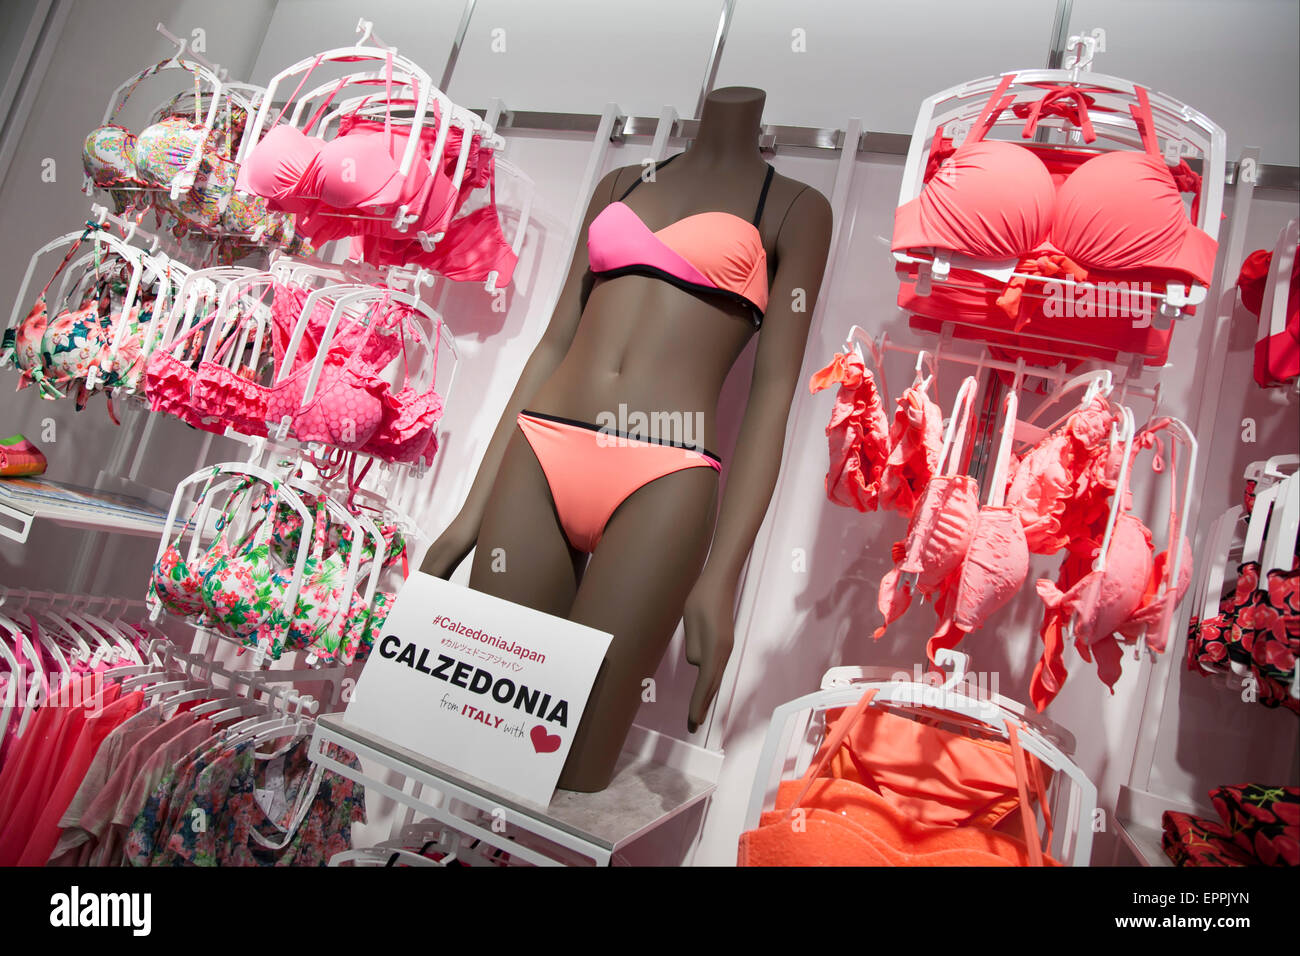 Tokyo, Japan. 21st May, 2015. Swimsuits on display at the new Calzedonia  store in Omotesando on May 21, 2015, Tokyo, Japan. Calzedonia is an Italian  specialist store that specializes in selling swimwear,